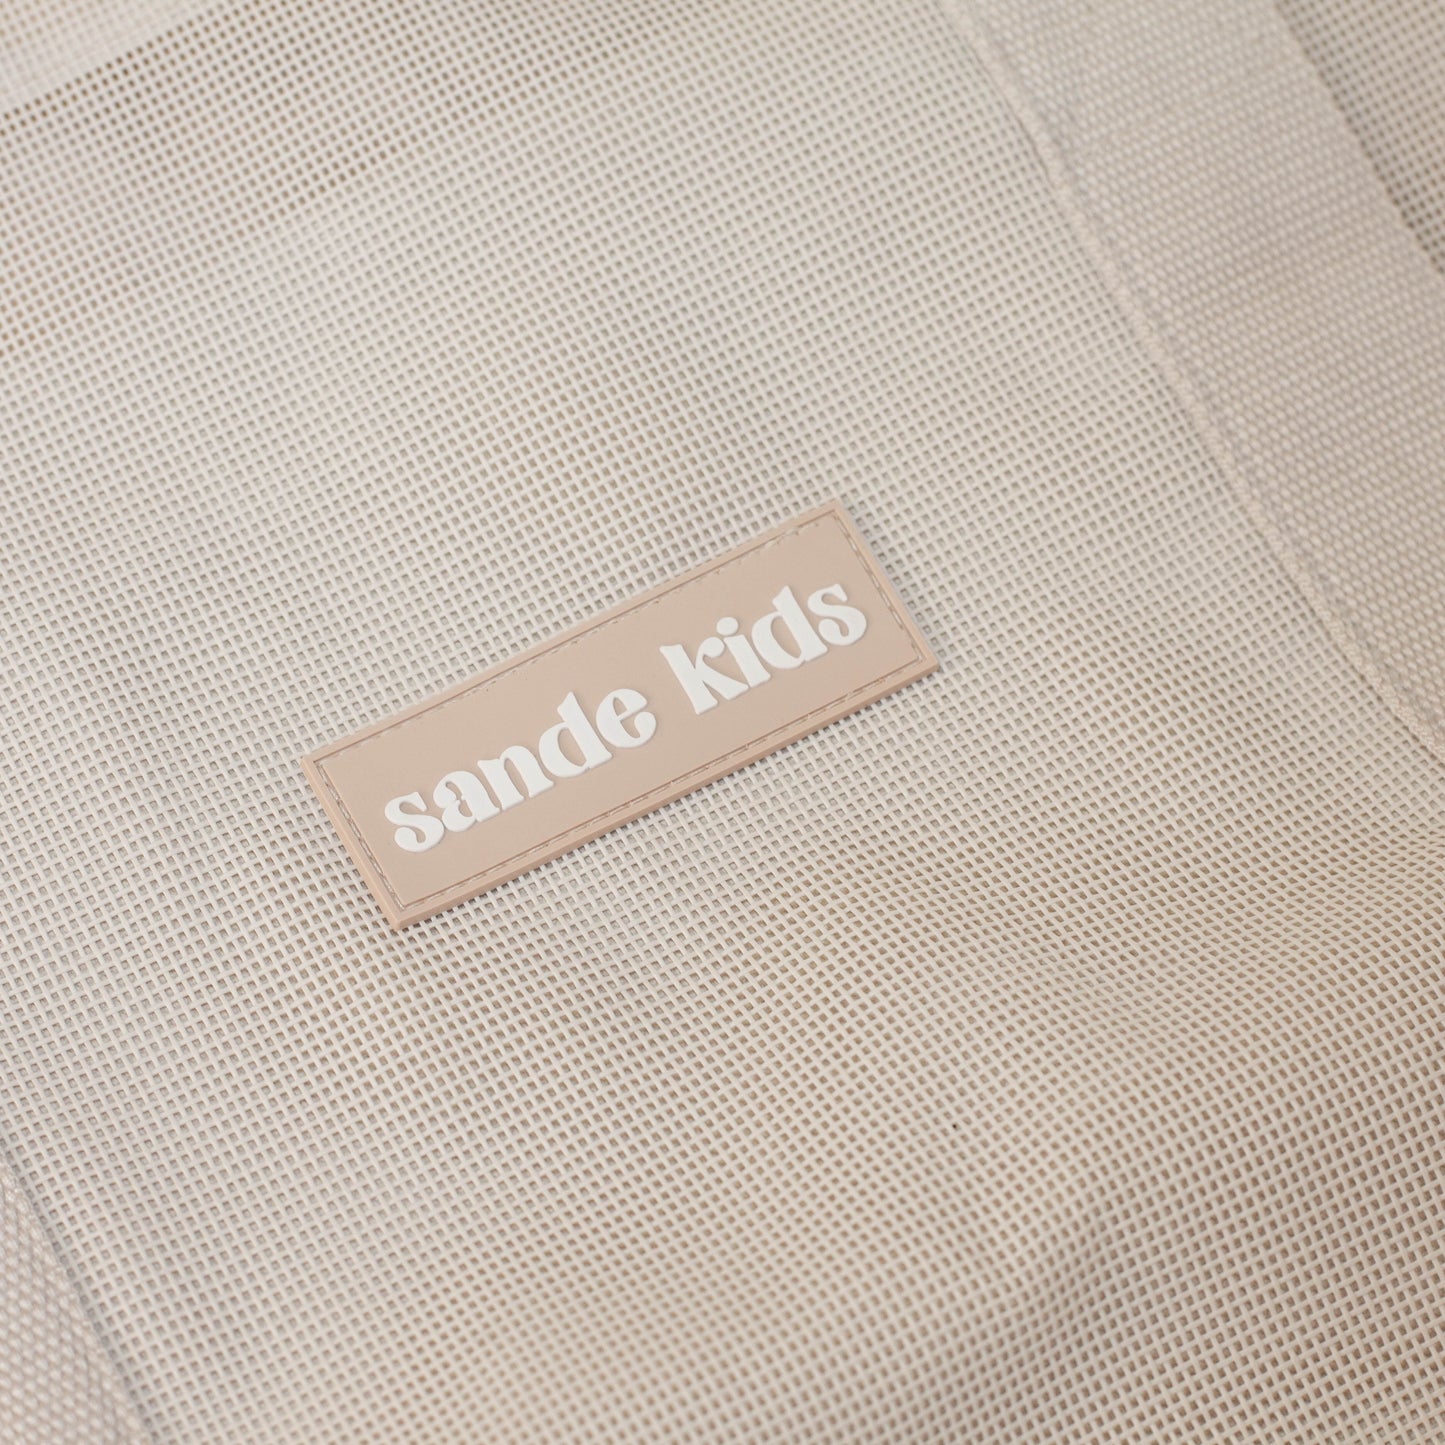 Sande Kids Beach Hauler™ - Close up on neutral mesh fabric and silicone brand label.